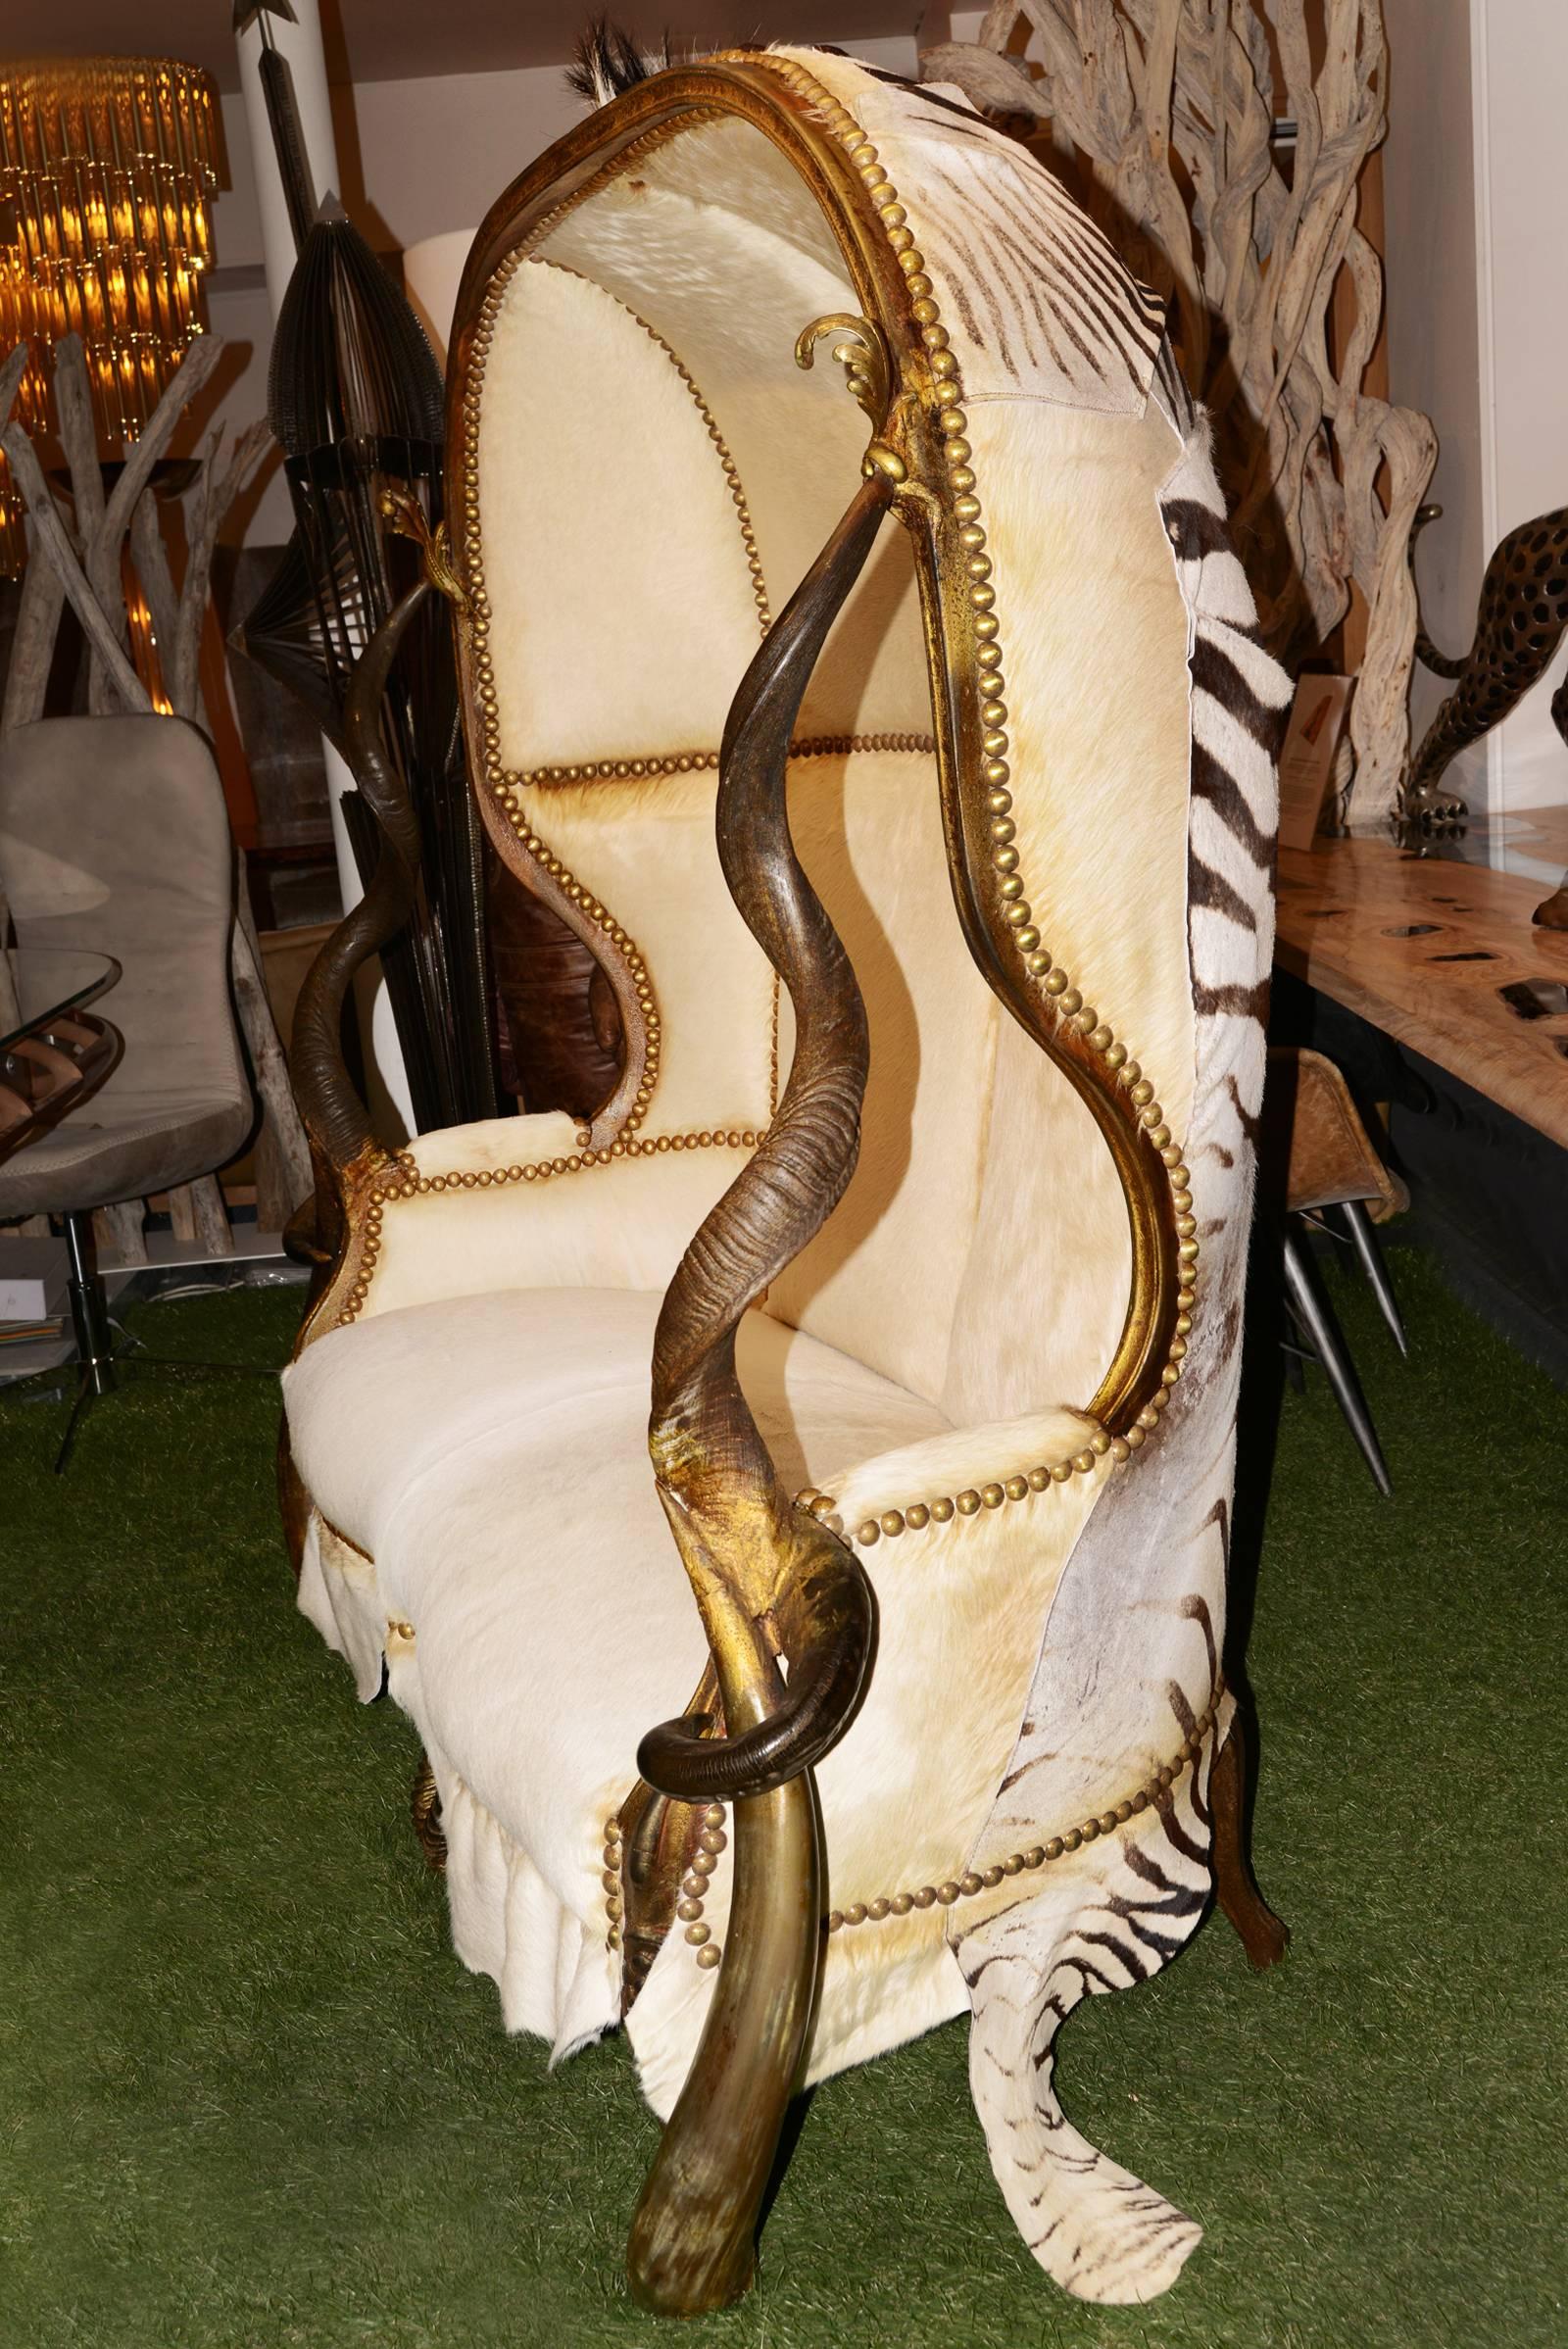 Hand-Crafted Grand Zebra Two-Seat Sofa with Zebra Skin and Real Horns